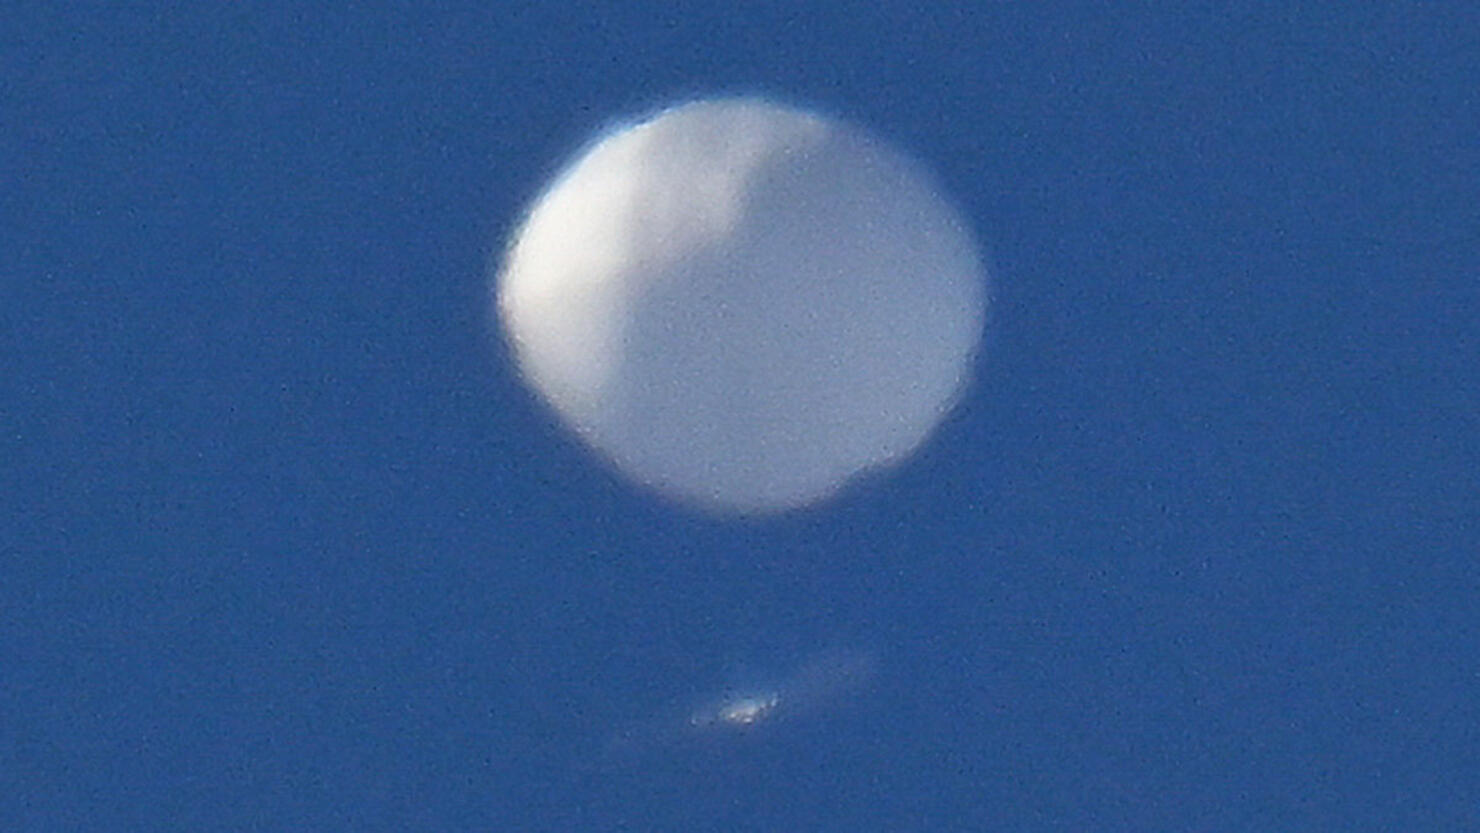 Chinese spy balloon flying above Charlotte